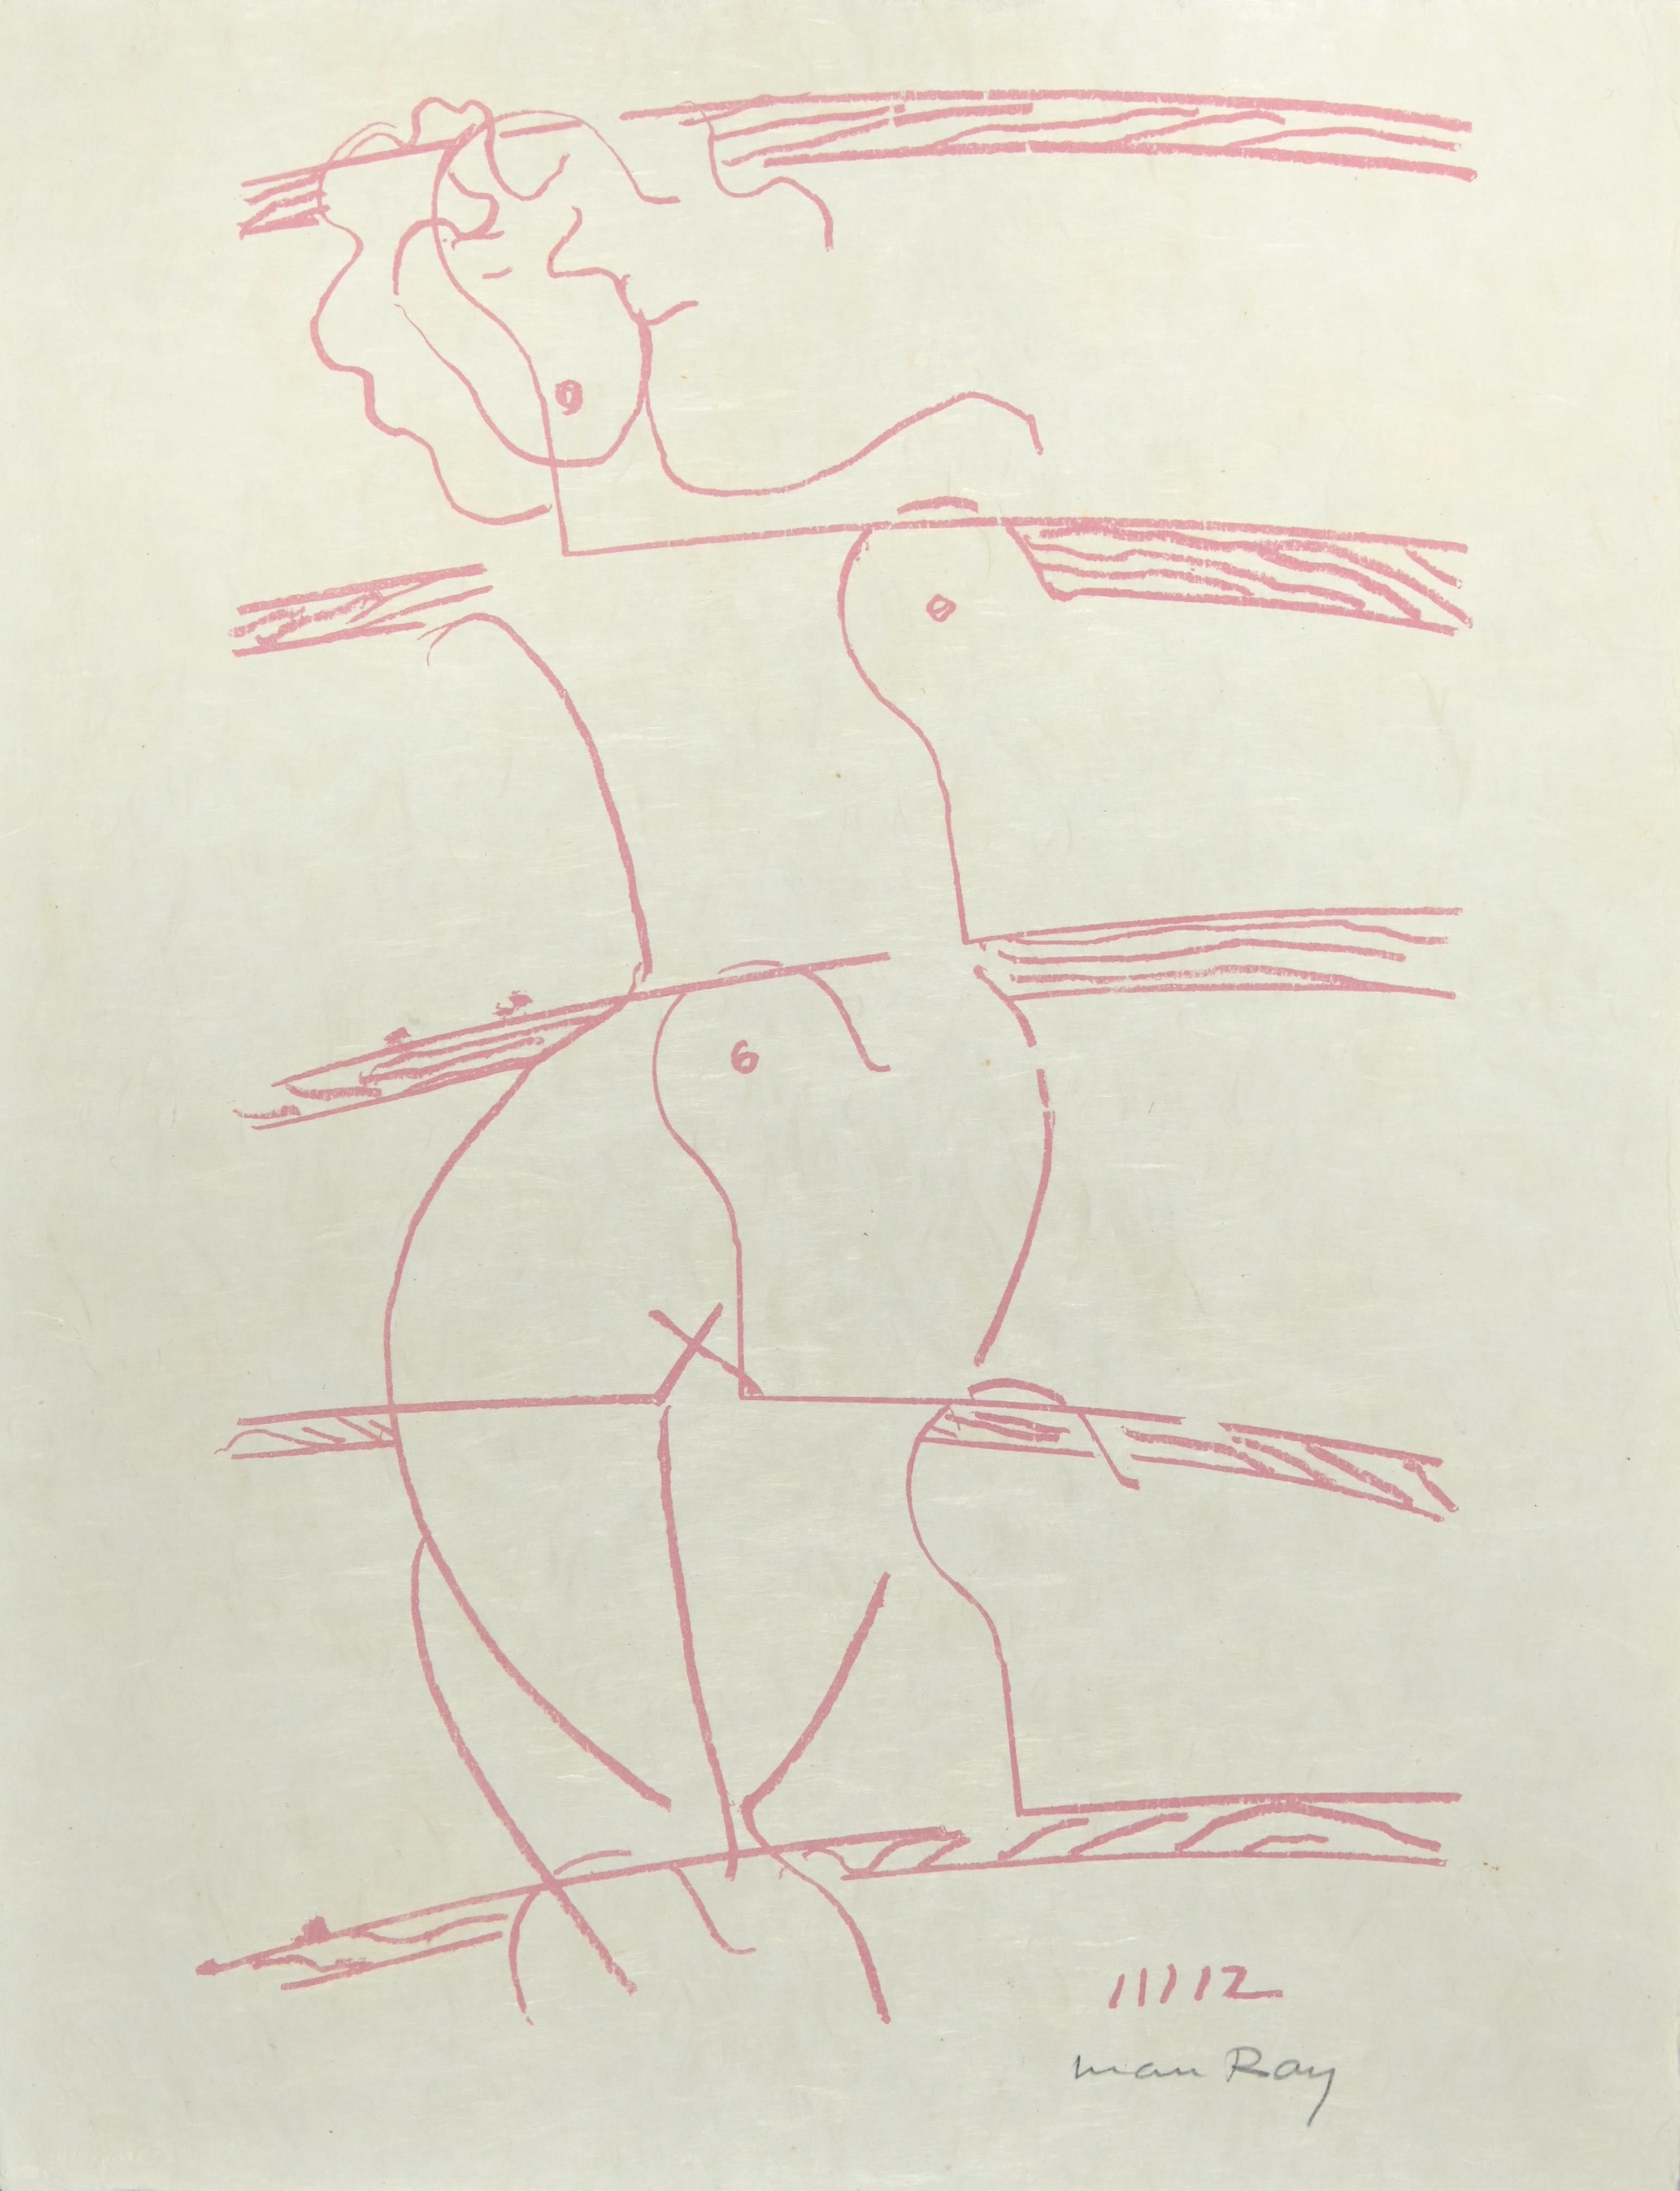 The Absolute Real is a lithograph realized by Man Ray in 1964.

Hand-singed in pencil by the Artist. 

Lithograph in Red Ink, 1964. Published by Schwarz, the lithograph is part of the Suite illustrating, along with graphic works by Marcel Duchamp,